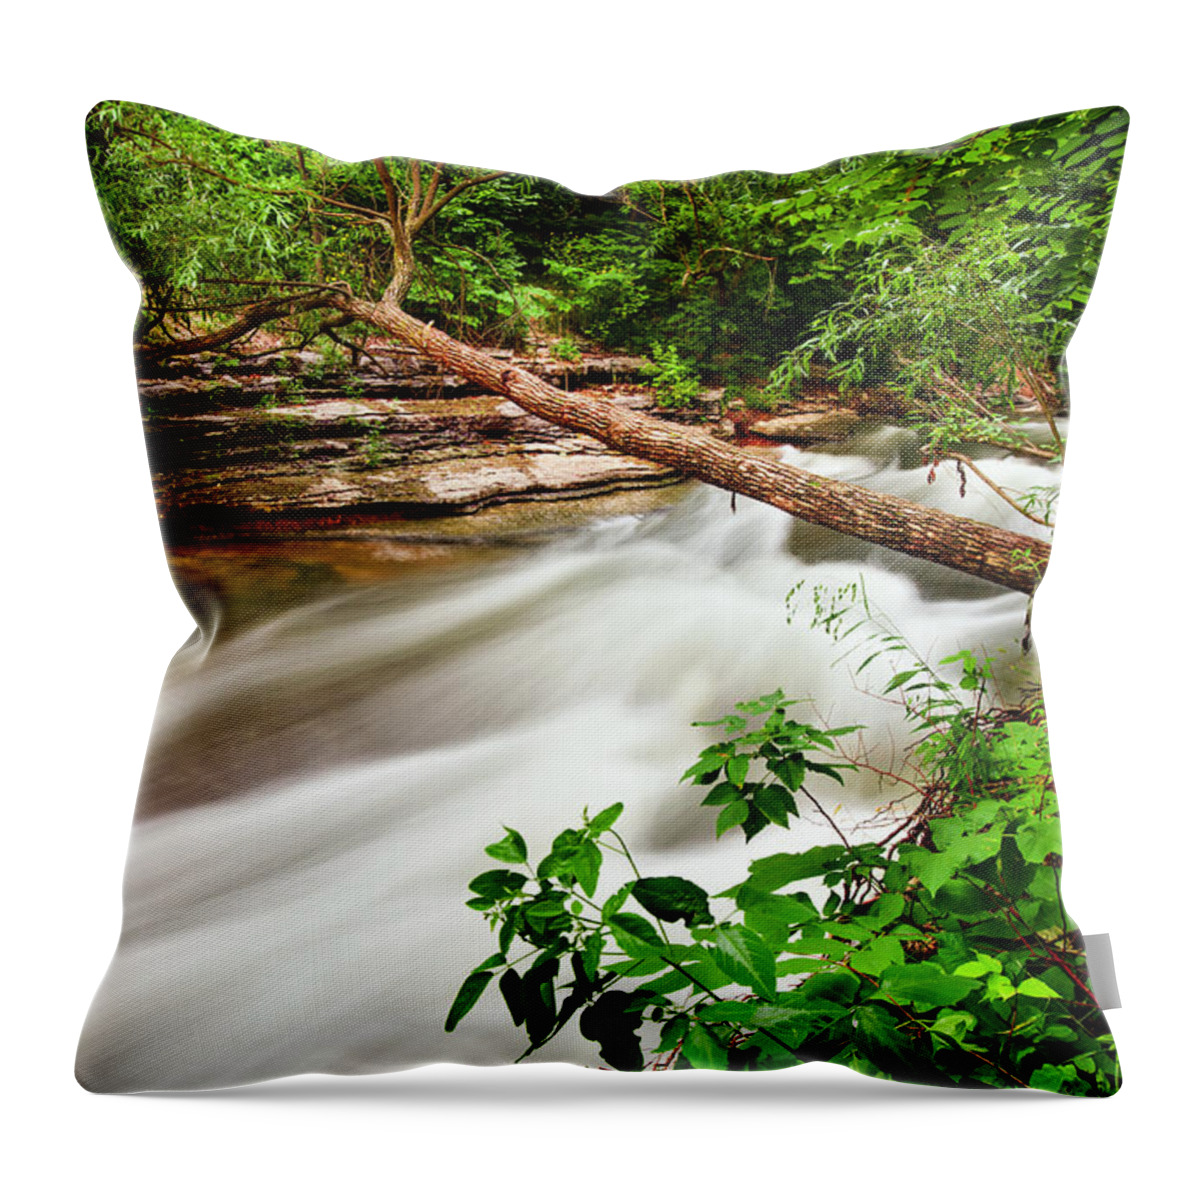 Tanyard Creek Throw Pillow featuring the photograph Tanyard Creek Flowing by Gregory Ballos